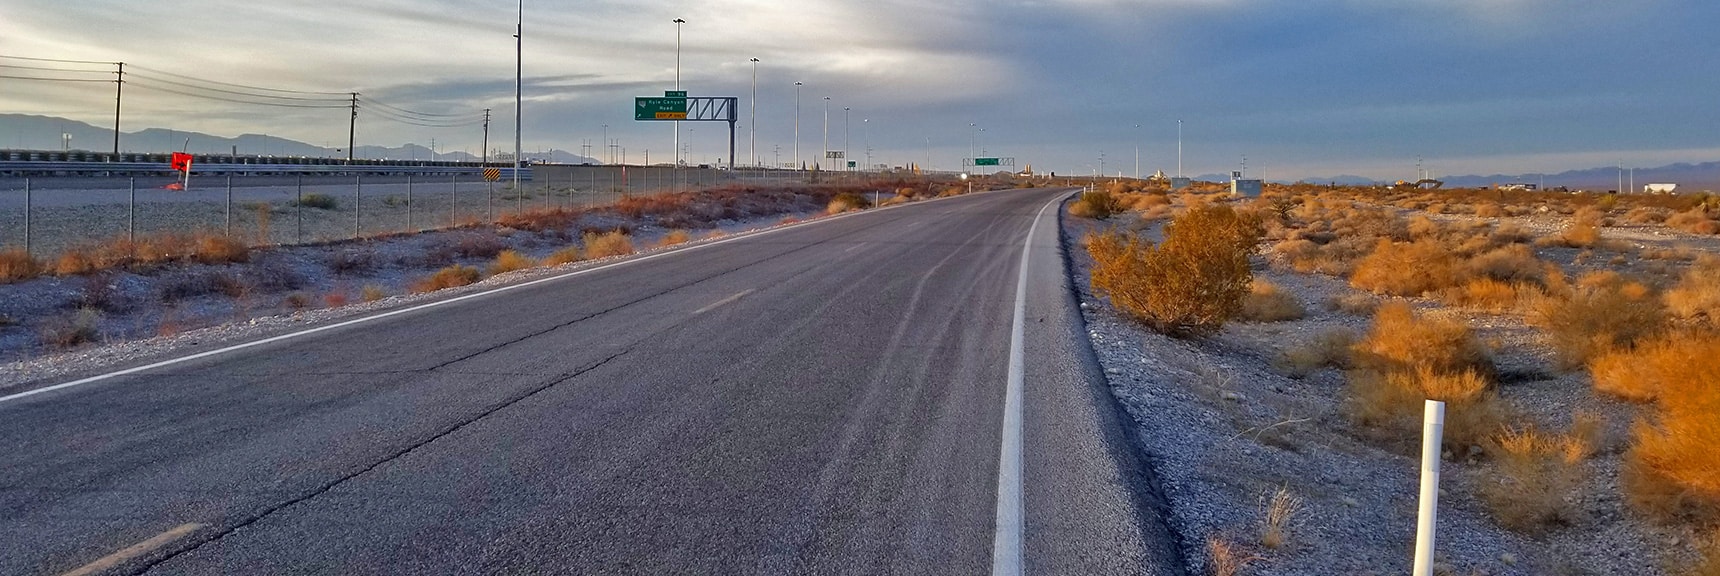 Kyle Canyon Rd Exit on 95 Viewed from Skye Point in Sunstone Estates Area | Snapshot of Las Vegas Northern Growth Edge on January 3, 2021